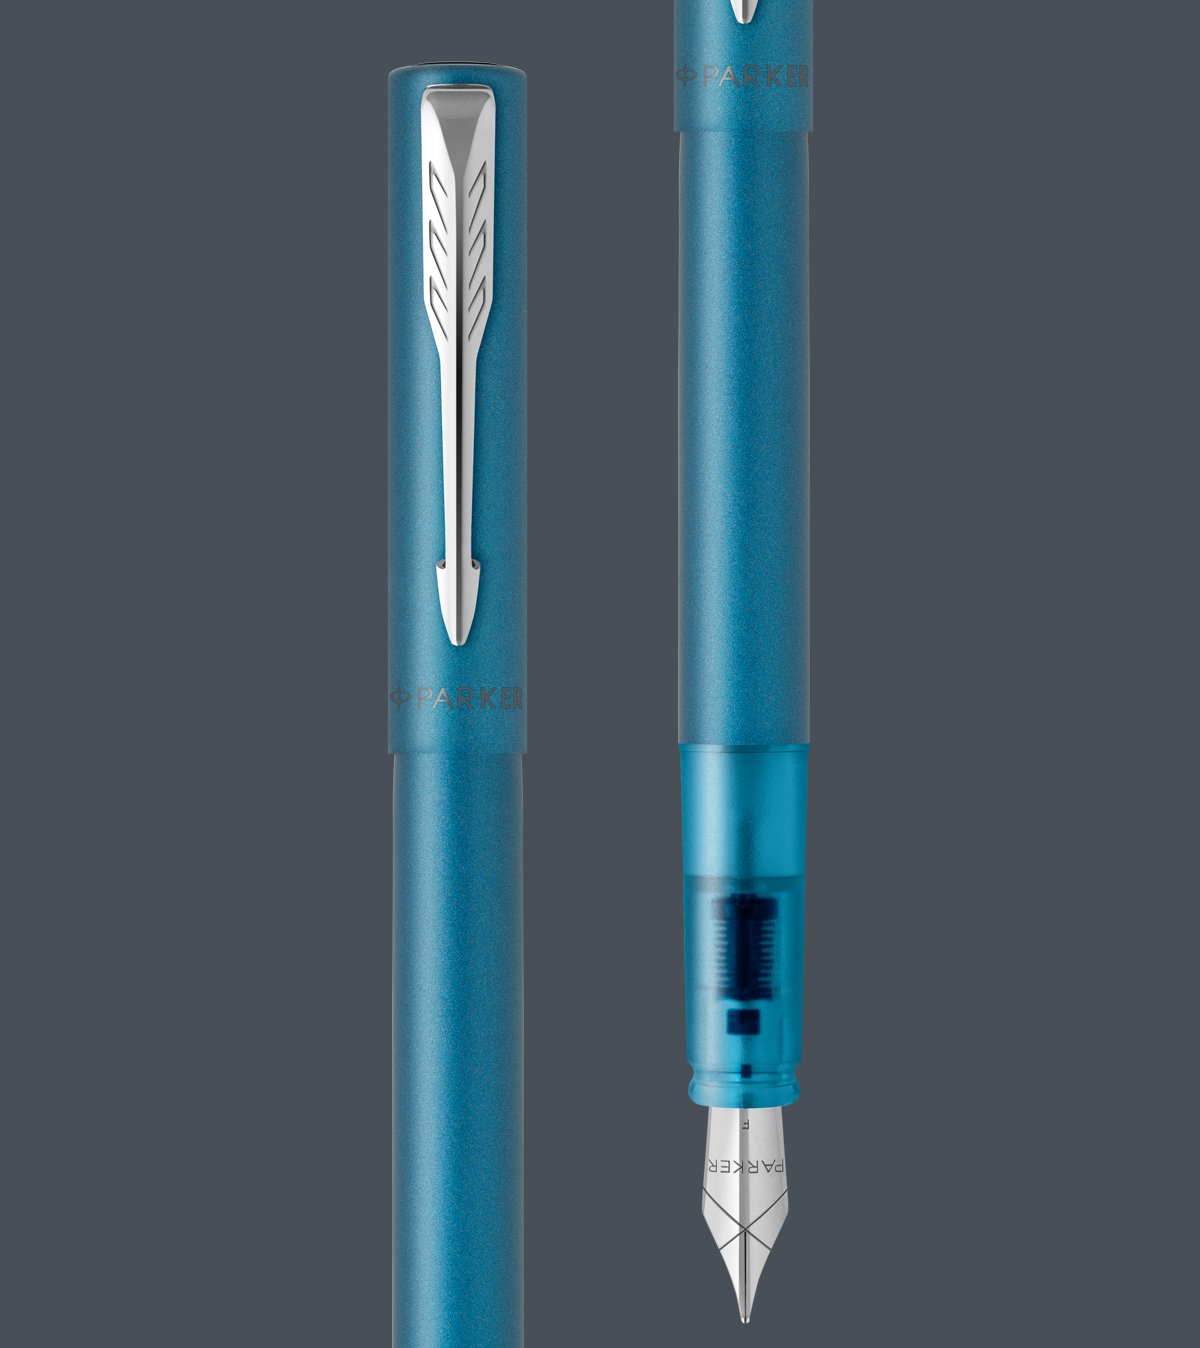 Two upright Vector fountain pens.